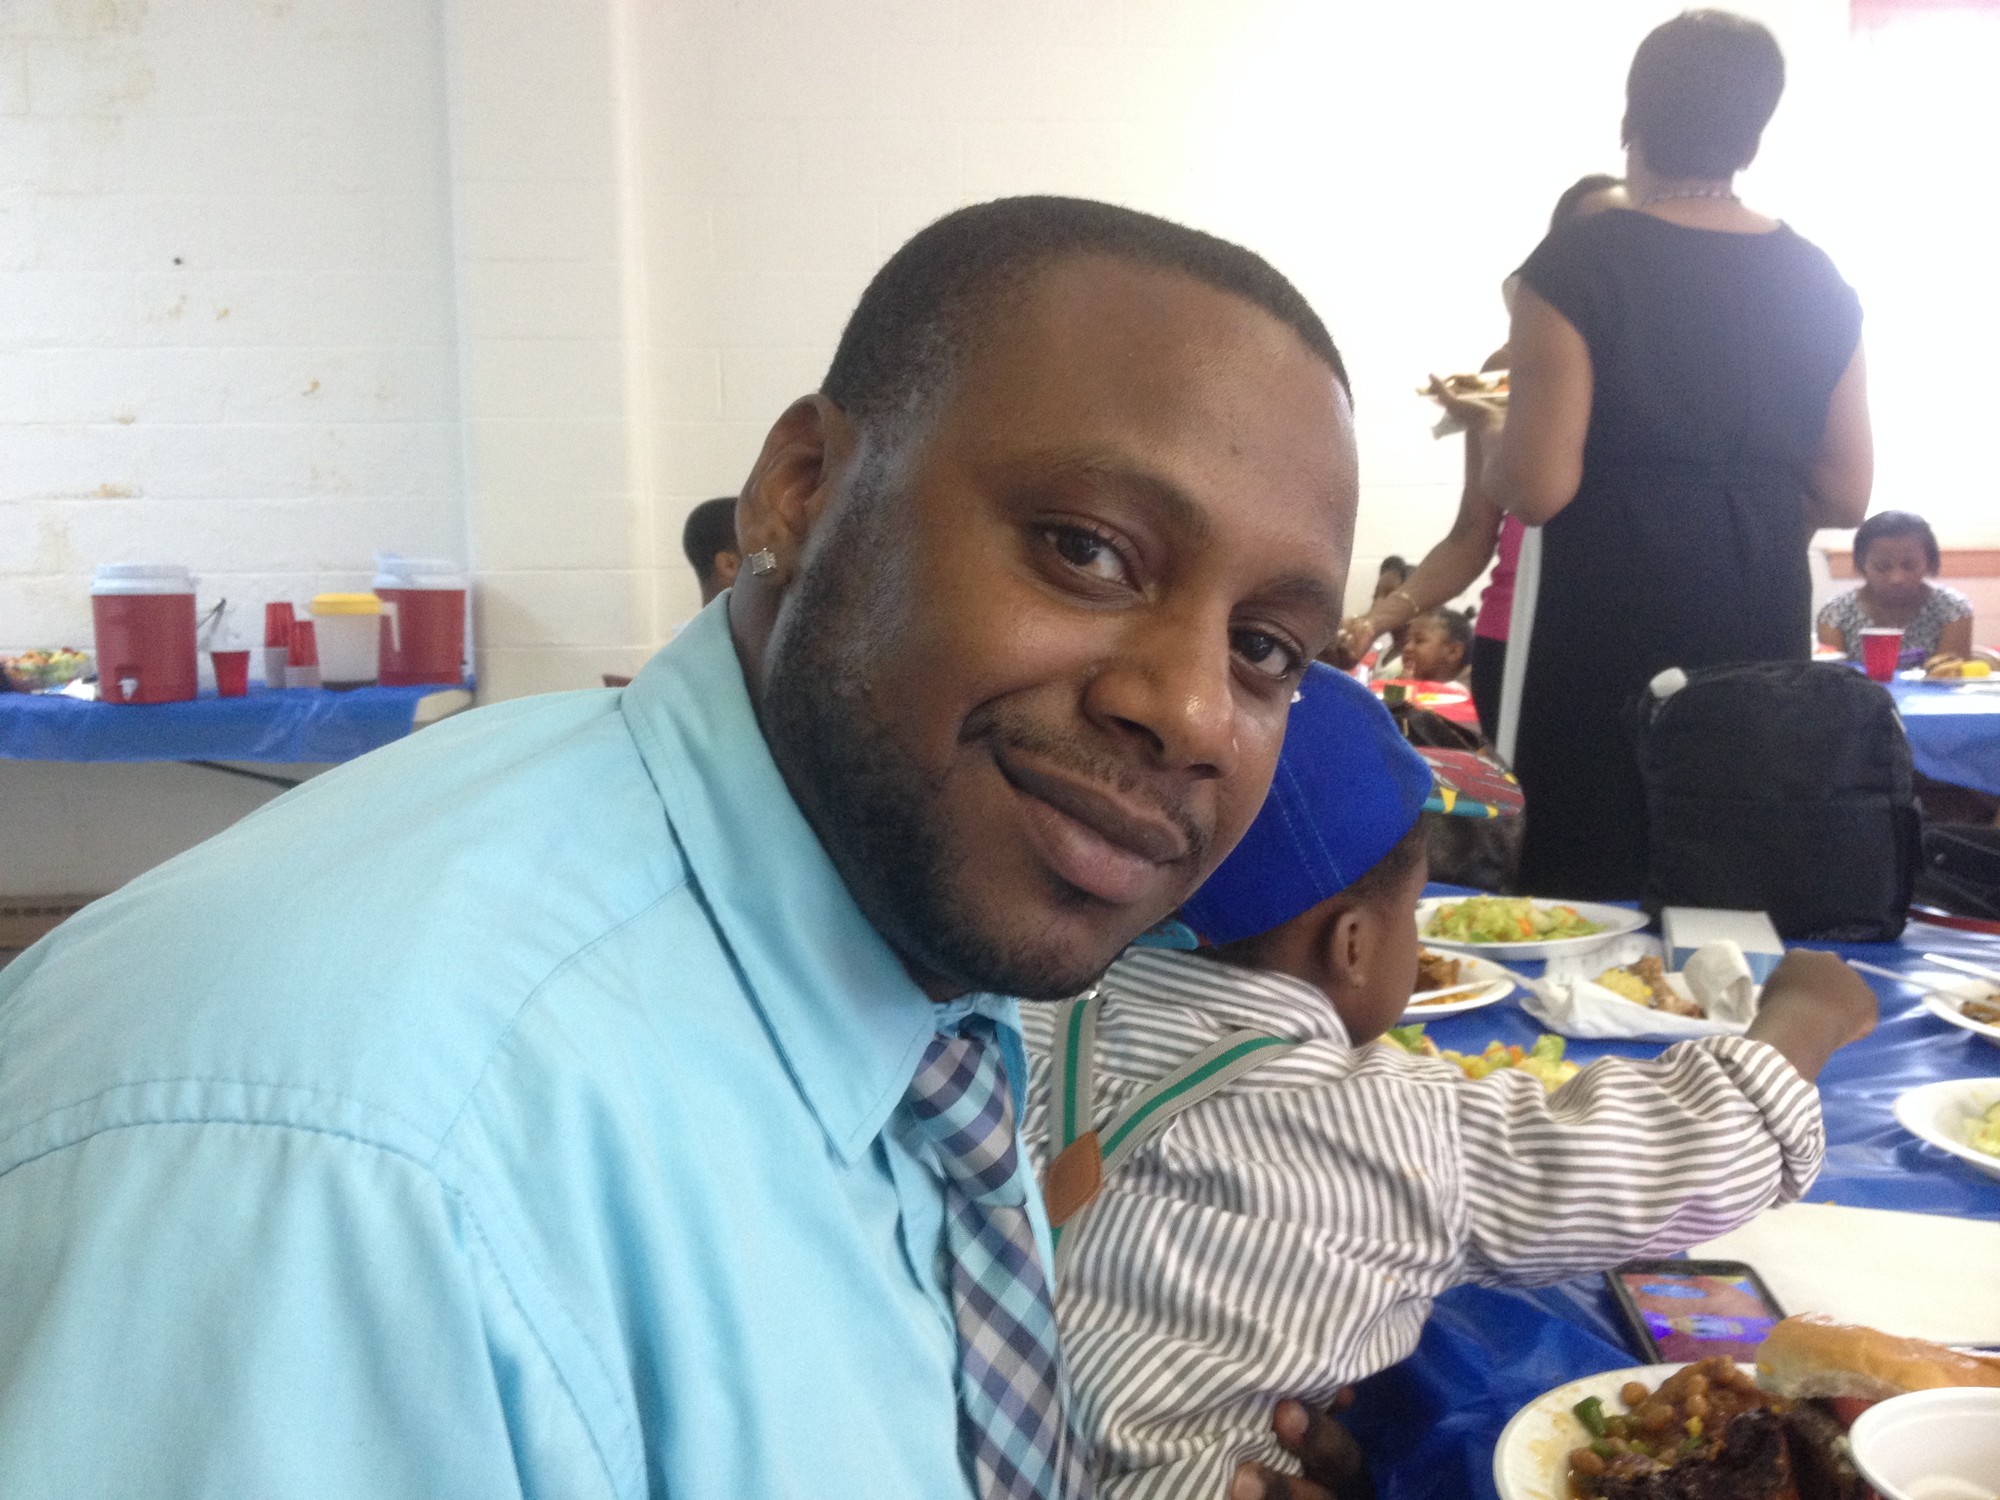 Congregant Justin Mack said he worries about his son’s safety and future as a black man.